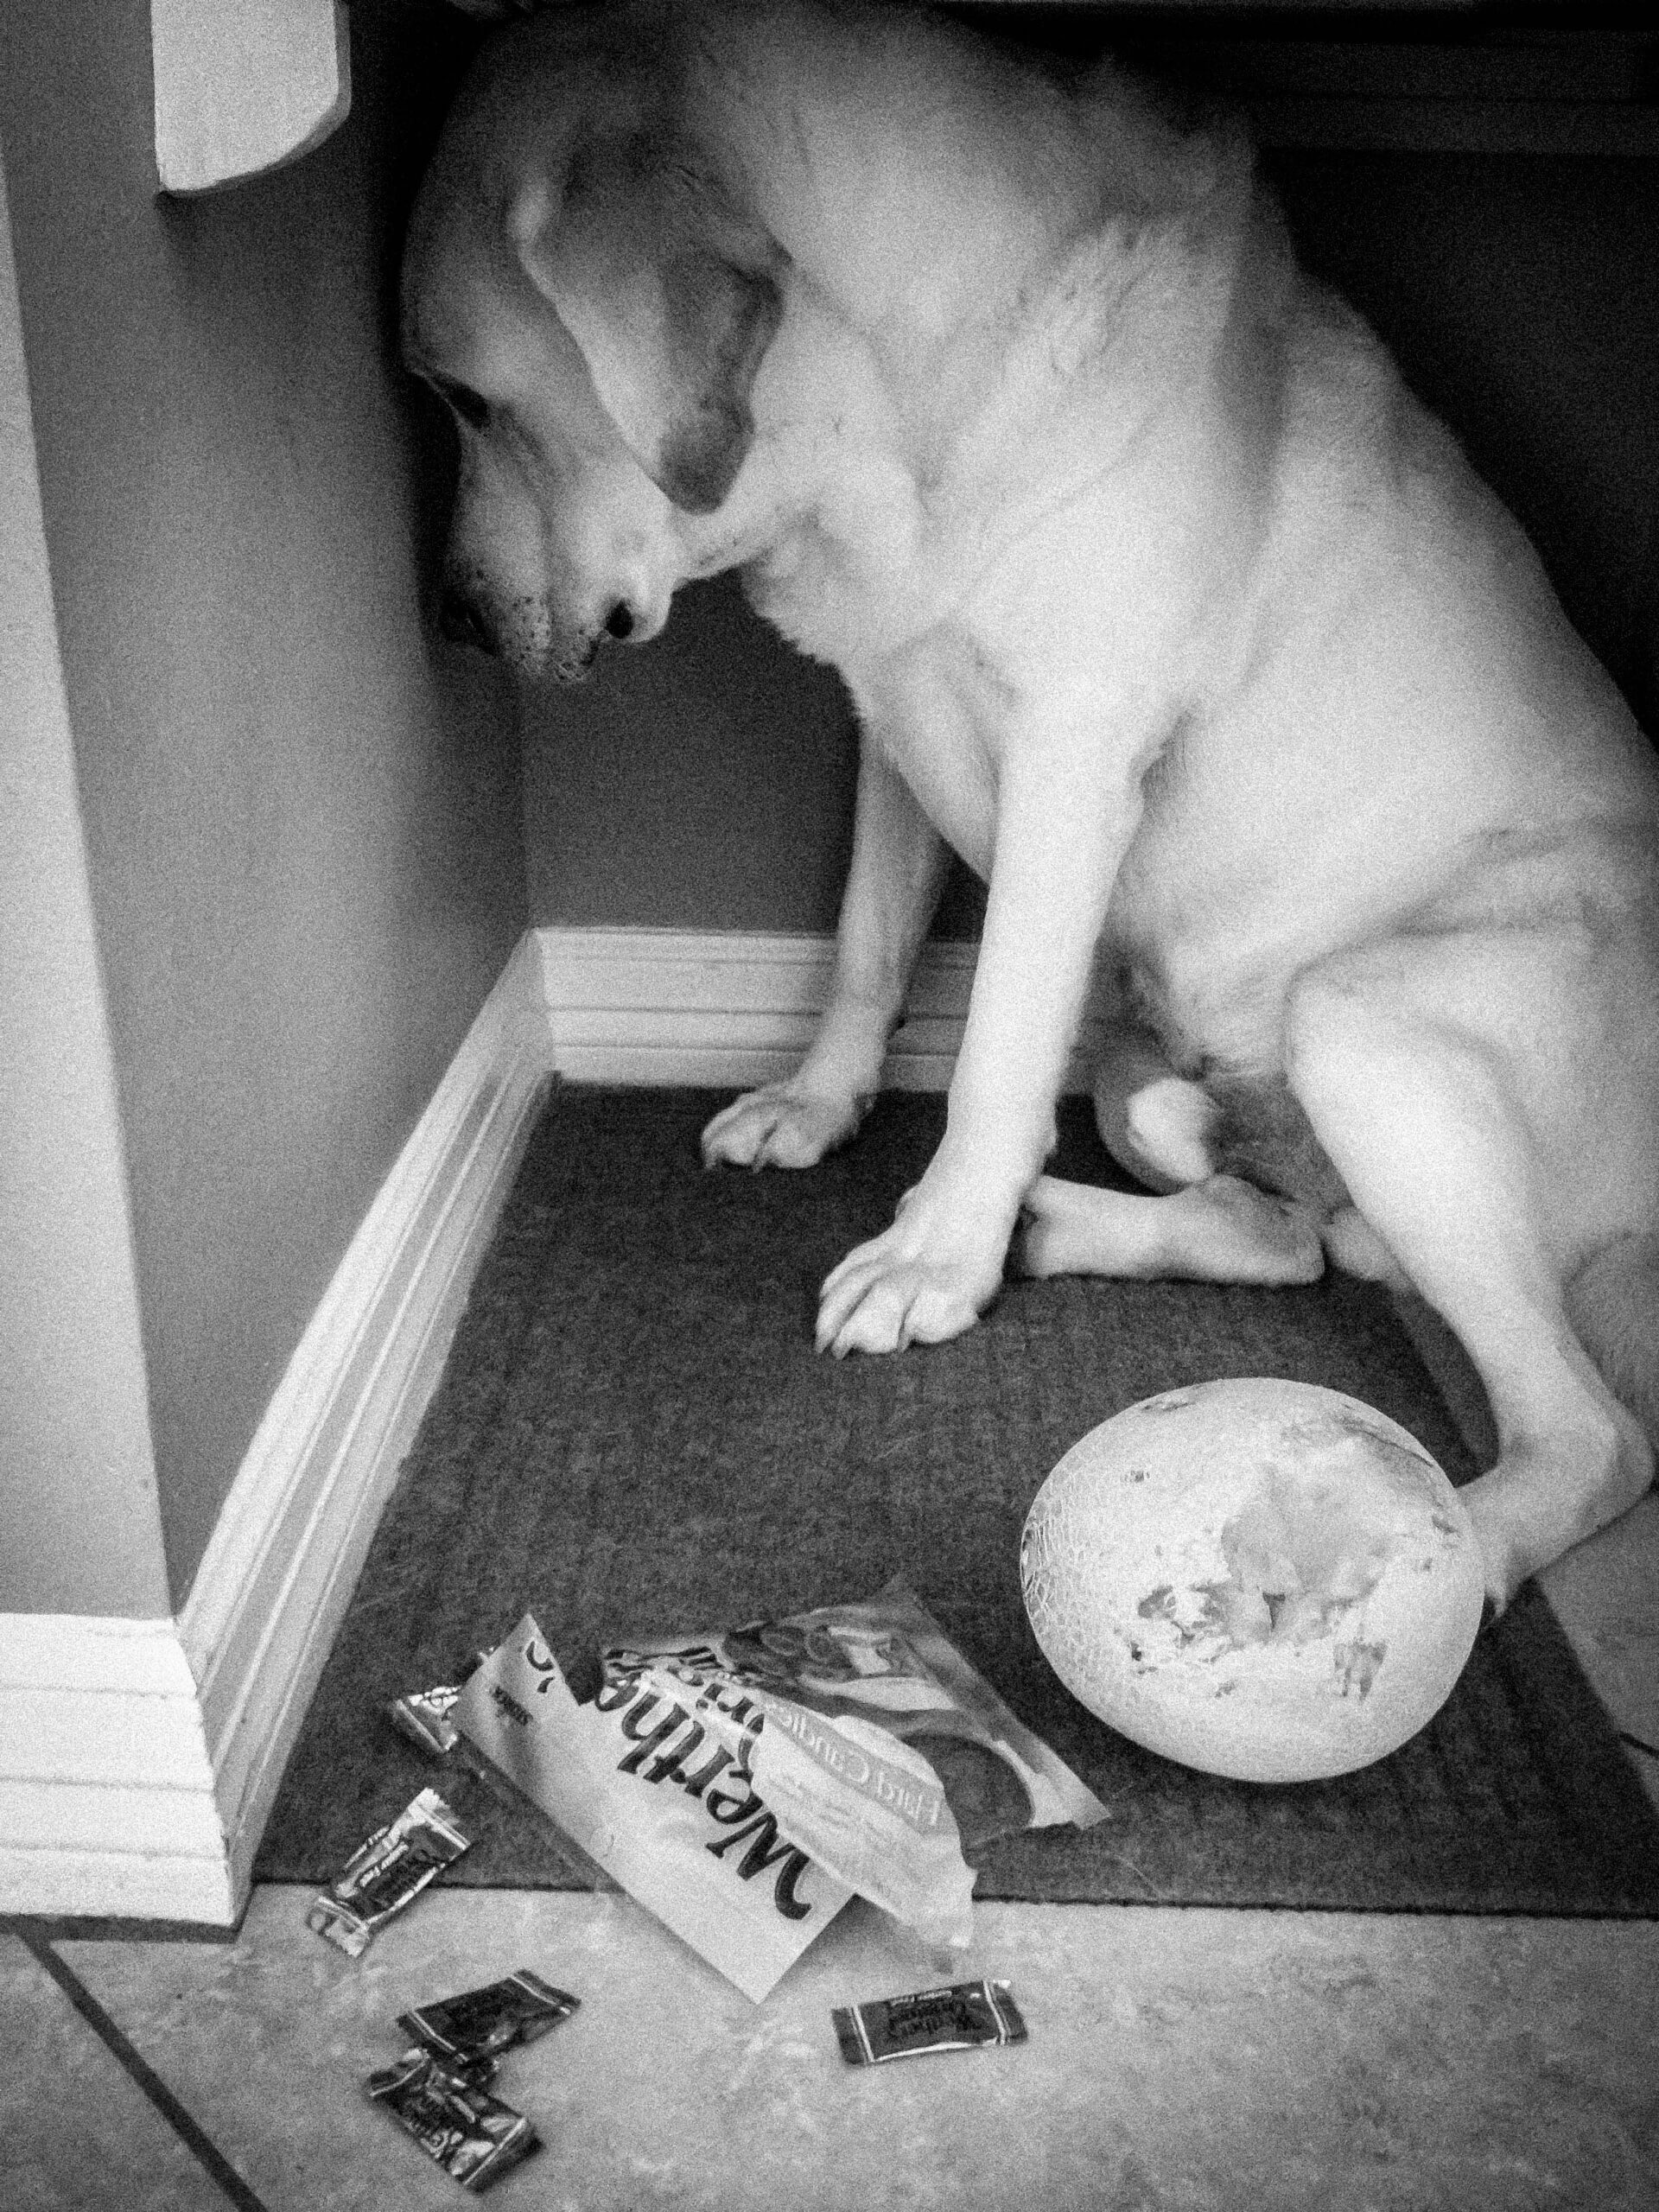 A dog sits beside an open bag of chocolate and a plate of food scraps.